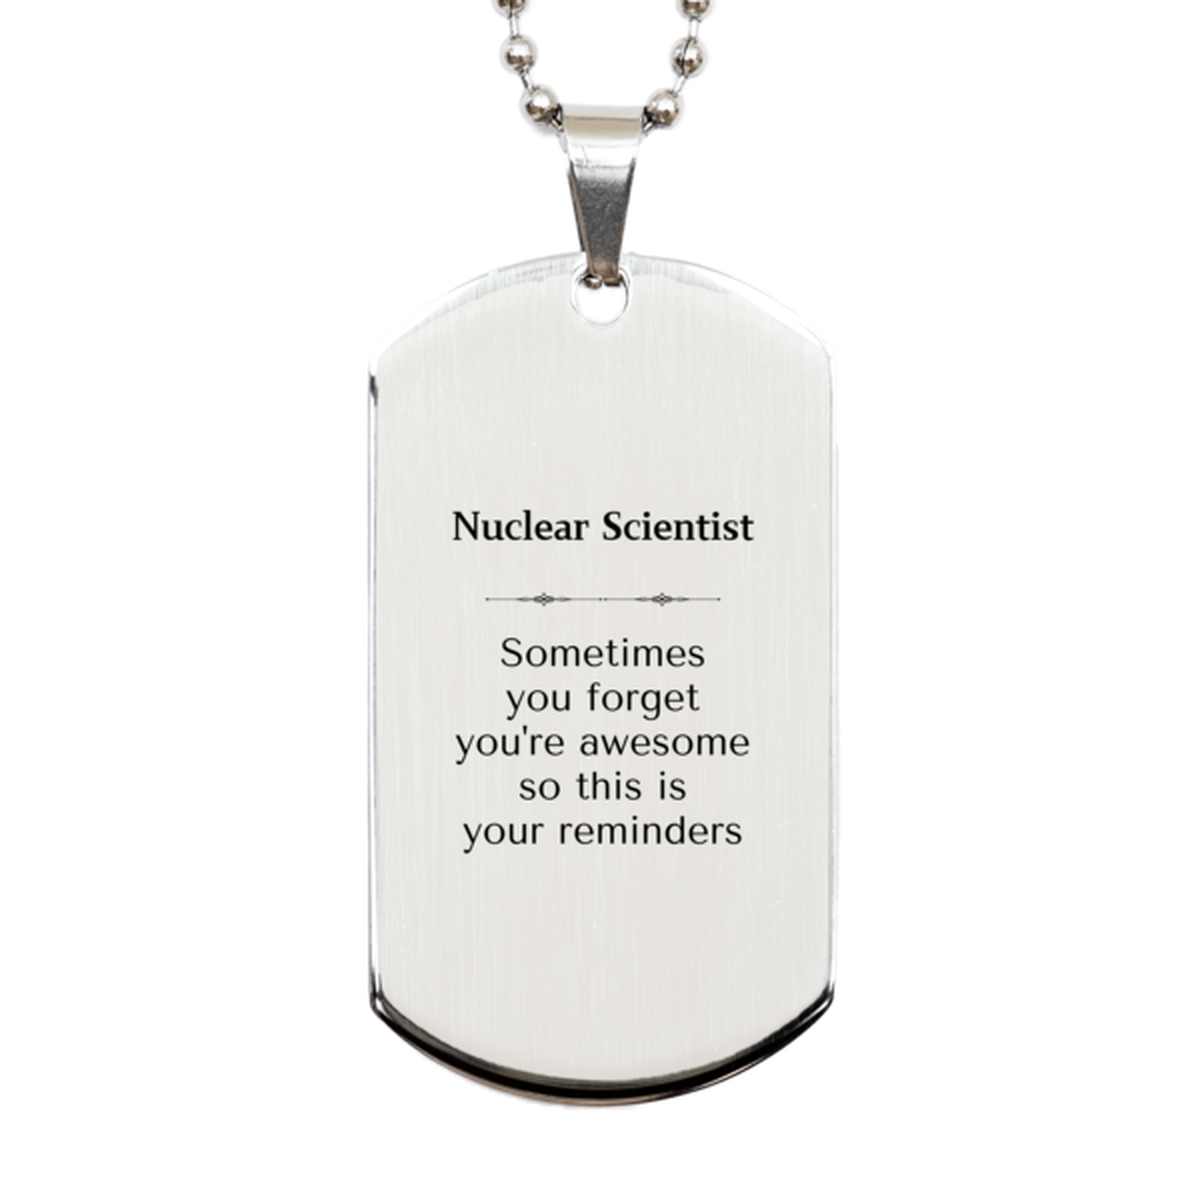 Sentimental Nuclear Scientist Silver Dog Tag, Nuclear Scientist Sometimes you forget you're awesome so this is your reminders, Graduation Christmas Birthday Gifts for Nuclear Scientist, Men, Women, Coworkers